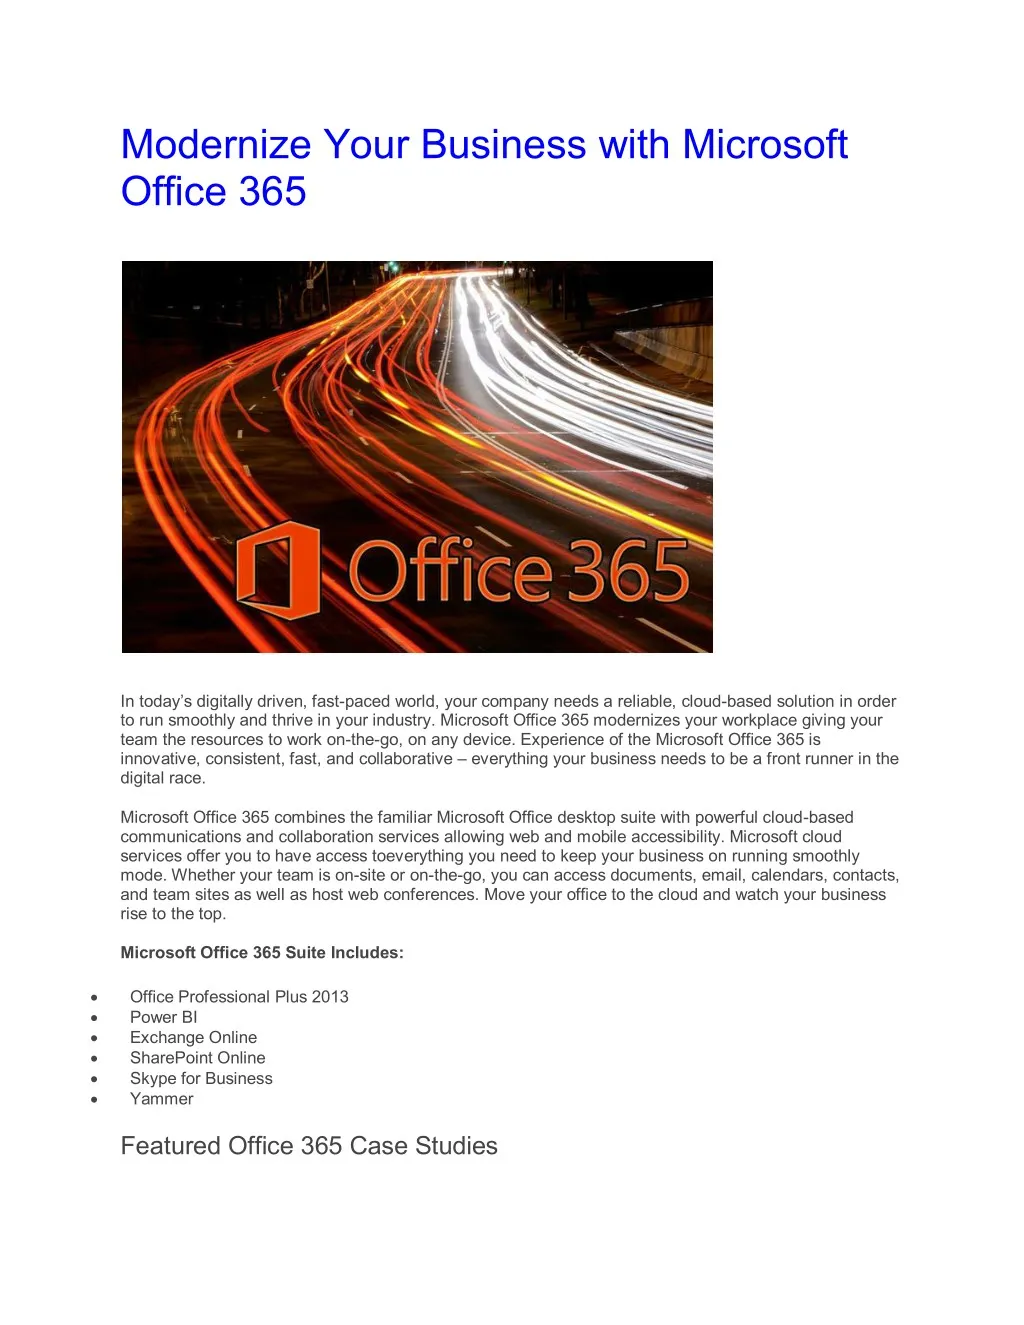 modernize your business with microsoft office 365